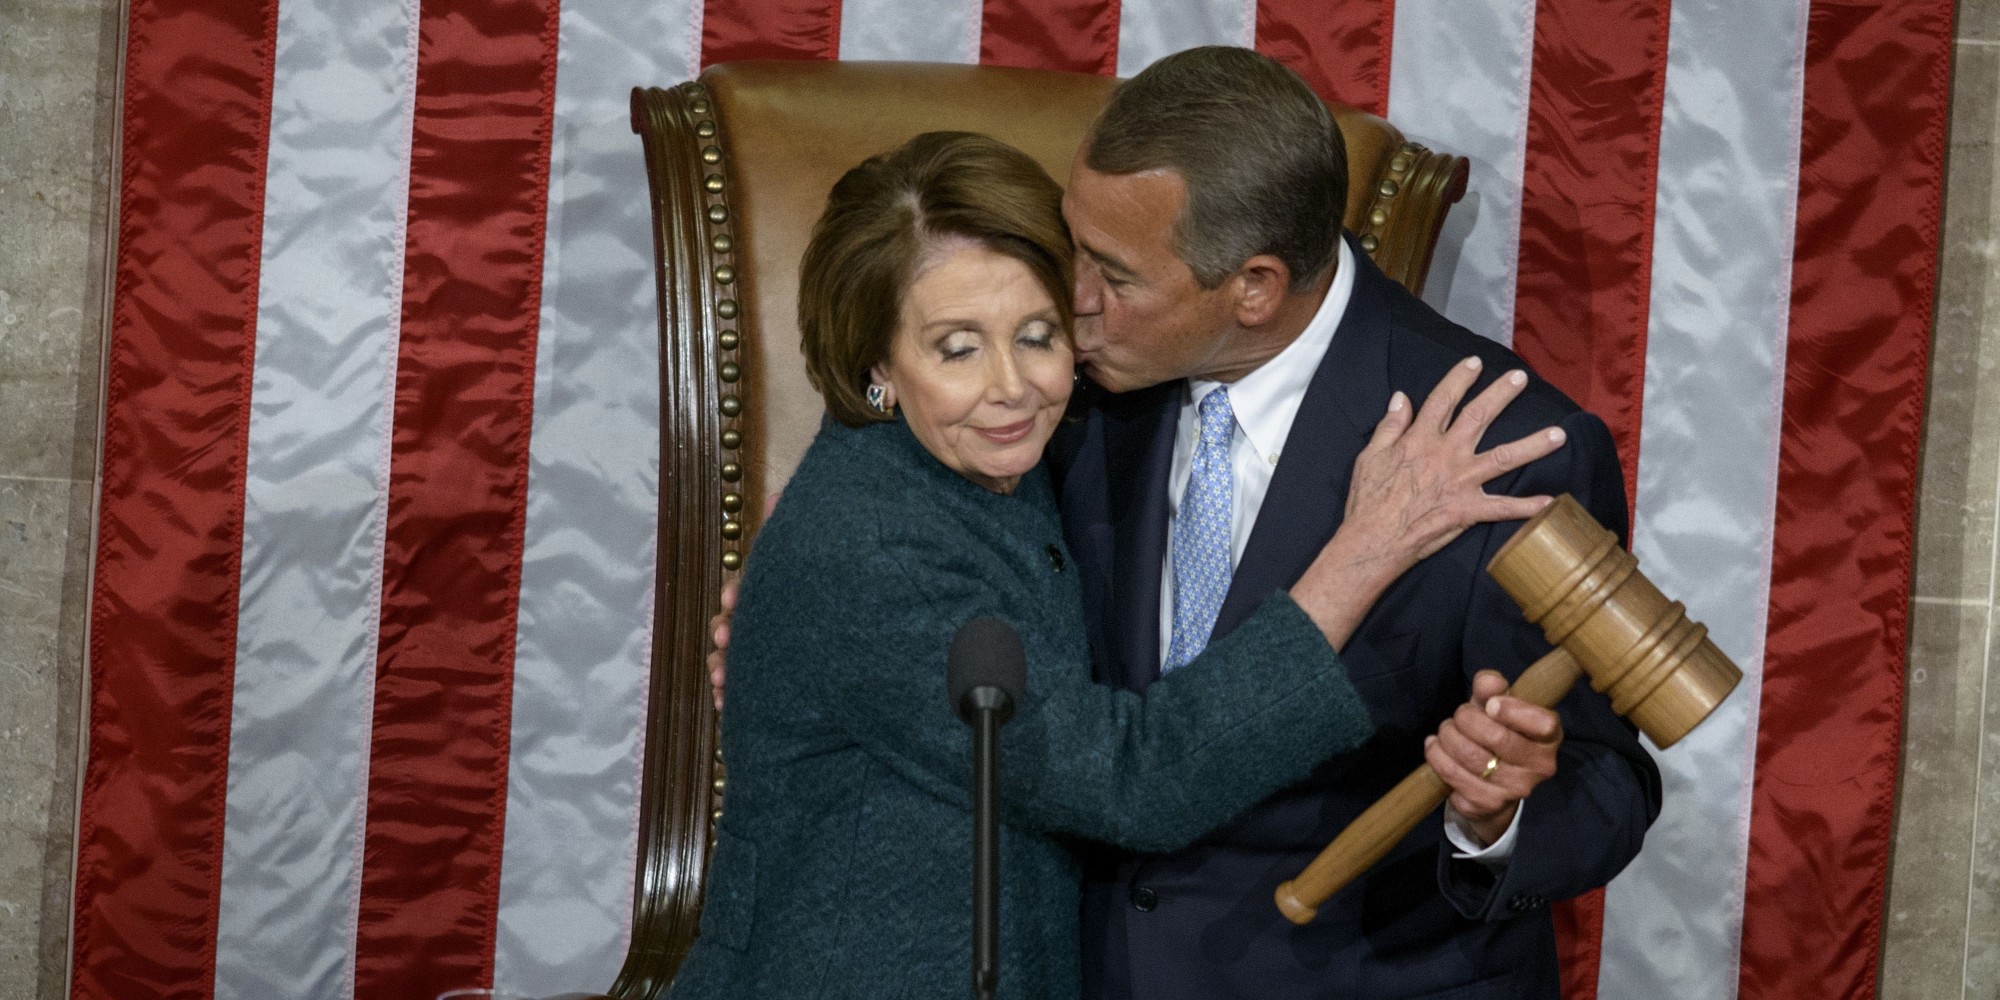 The Best Pictures From The First Day Of The 114th Congress | HuffPost2000 x 1000